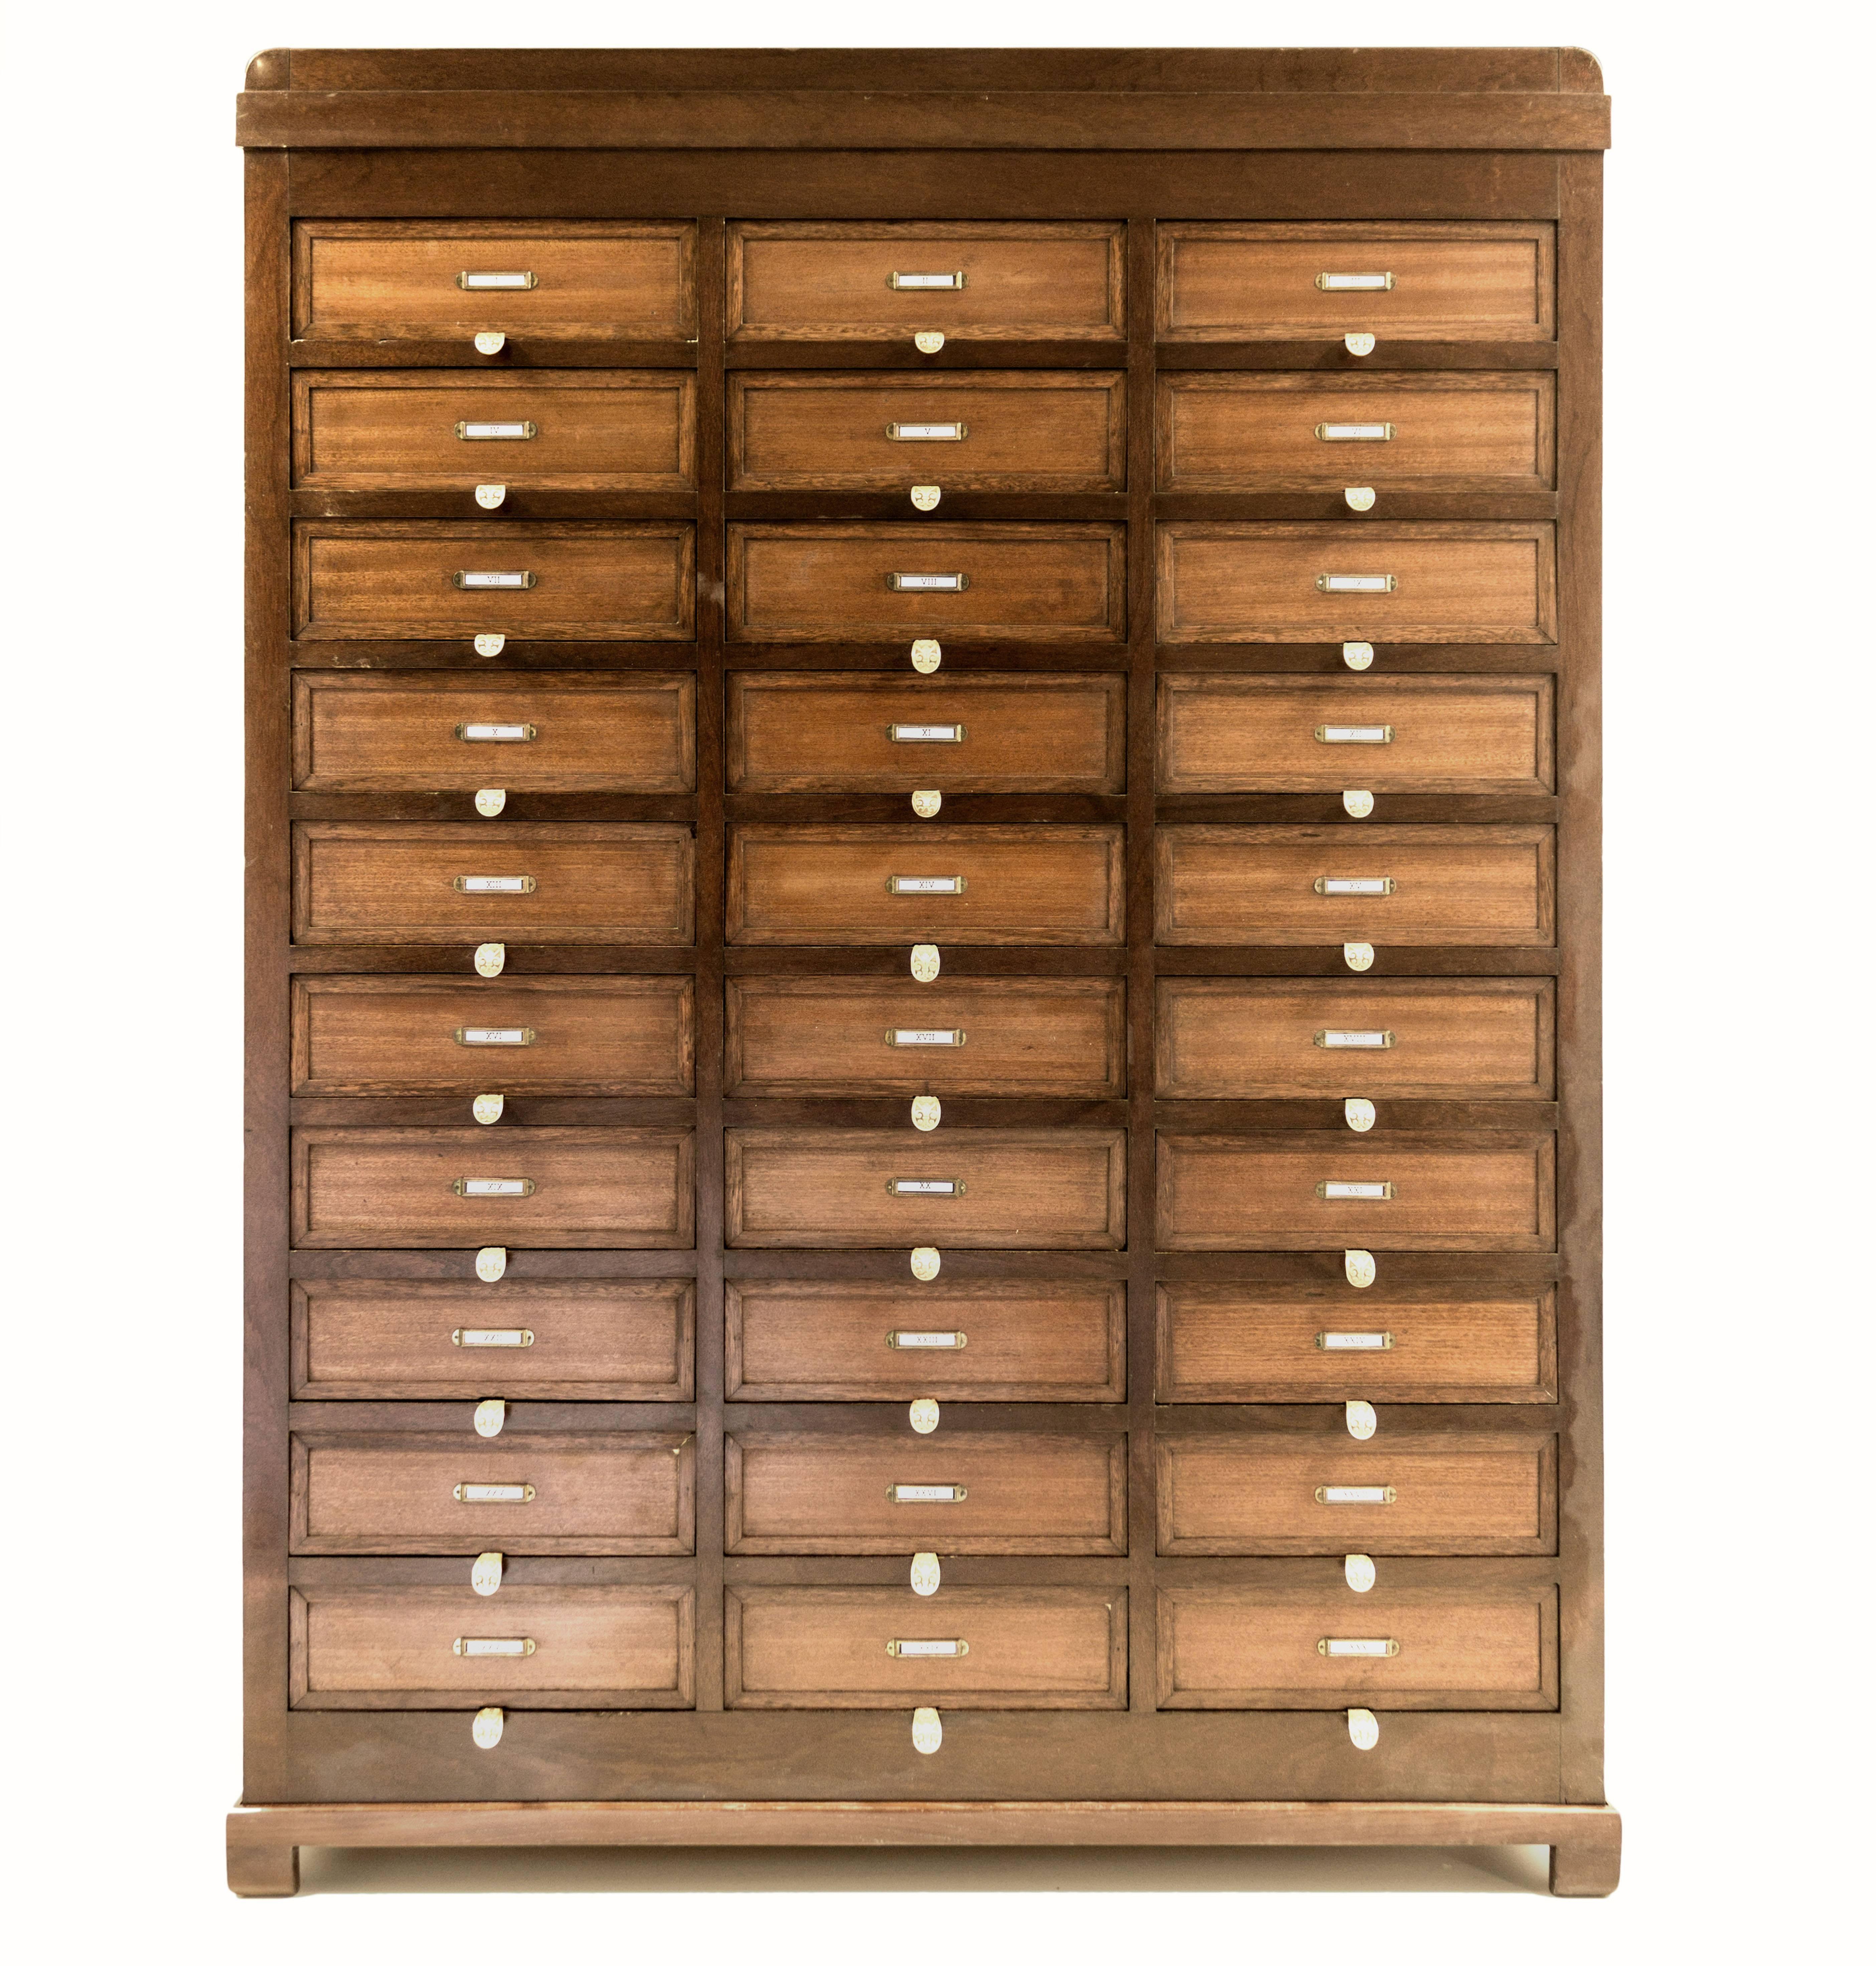 Mid-20th century mahogany filling cabinet.
The cabinet has 30 drawers with a functional pull over system.
Each drawer has a beautiful solid brass rod to pull it over.
The base has been added in a second time and it is not authentic as the rest of